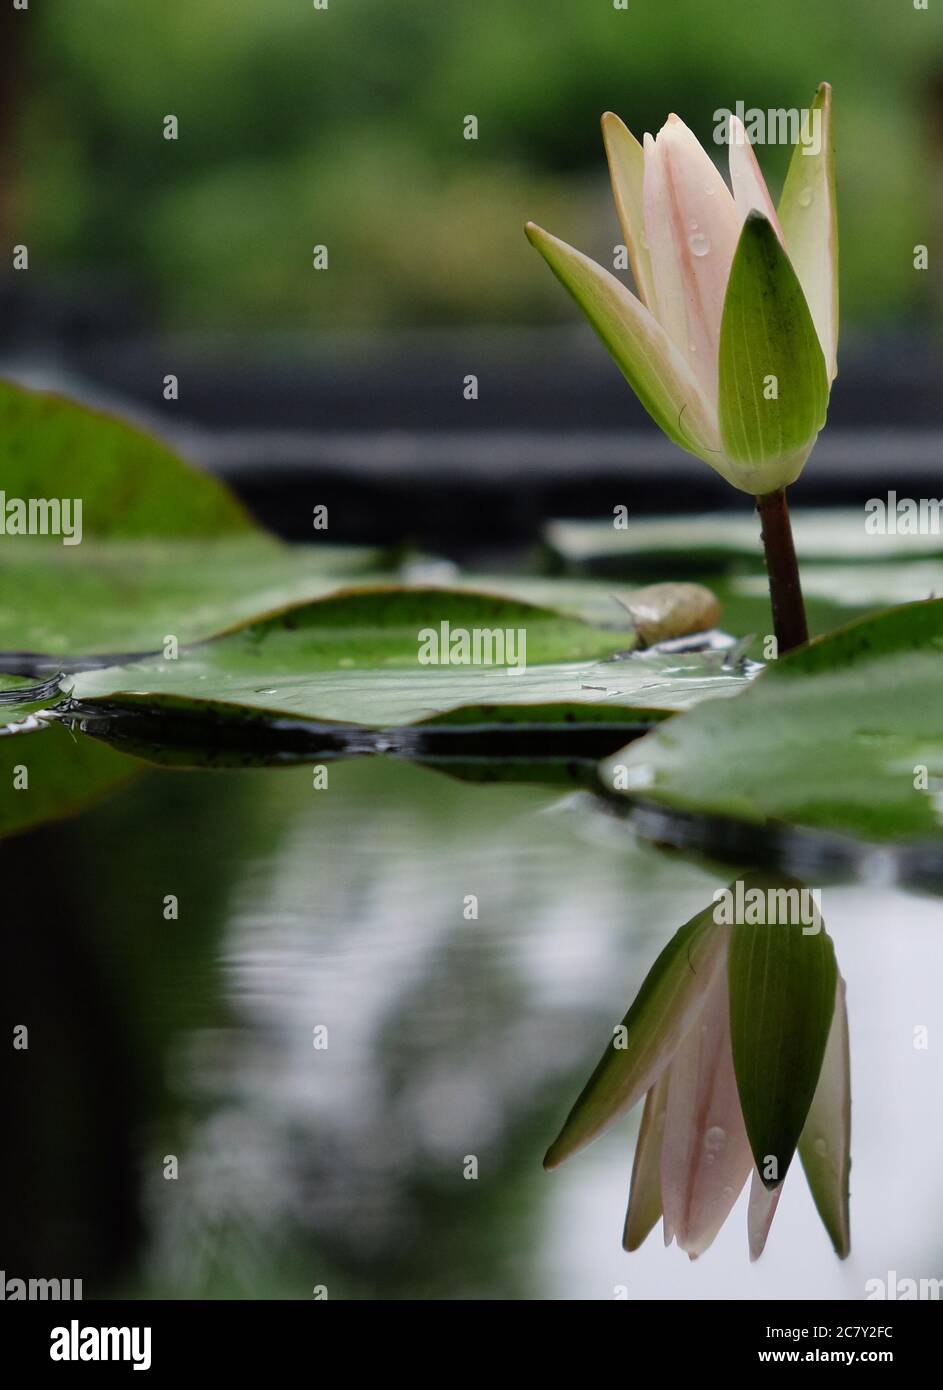 close up one pink lotus flower bud with water drops. Symmetric reflection in clear pond water. blurred green background Stock Photo